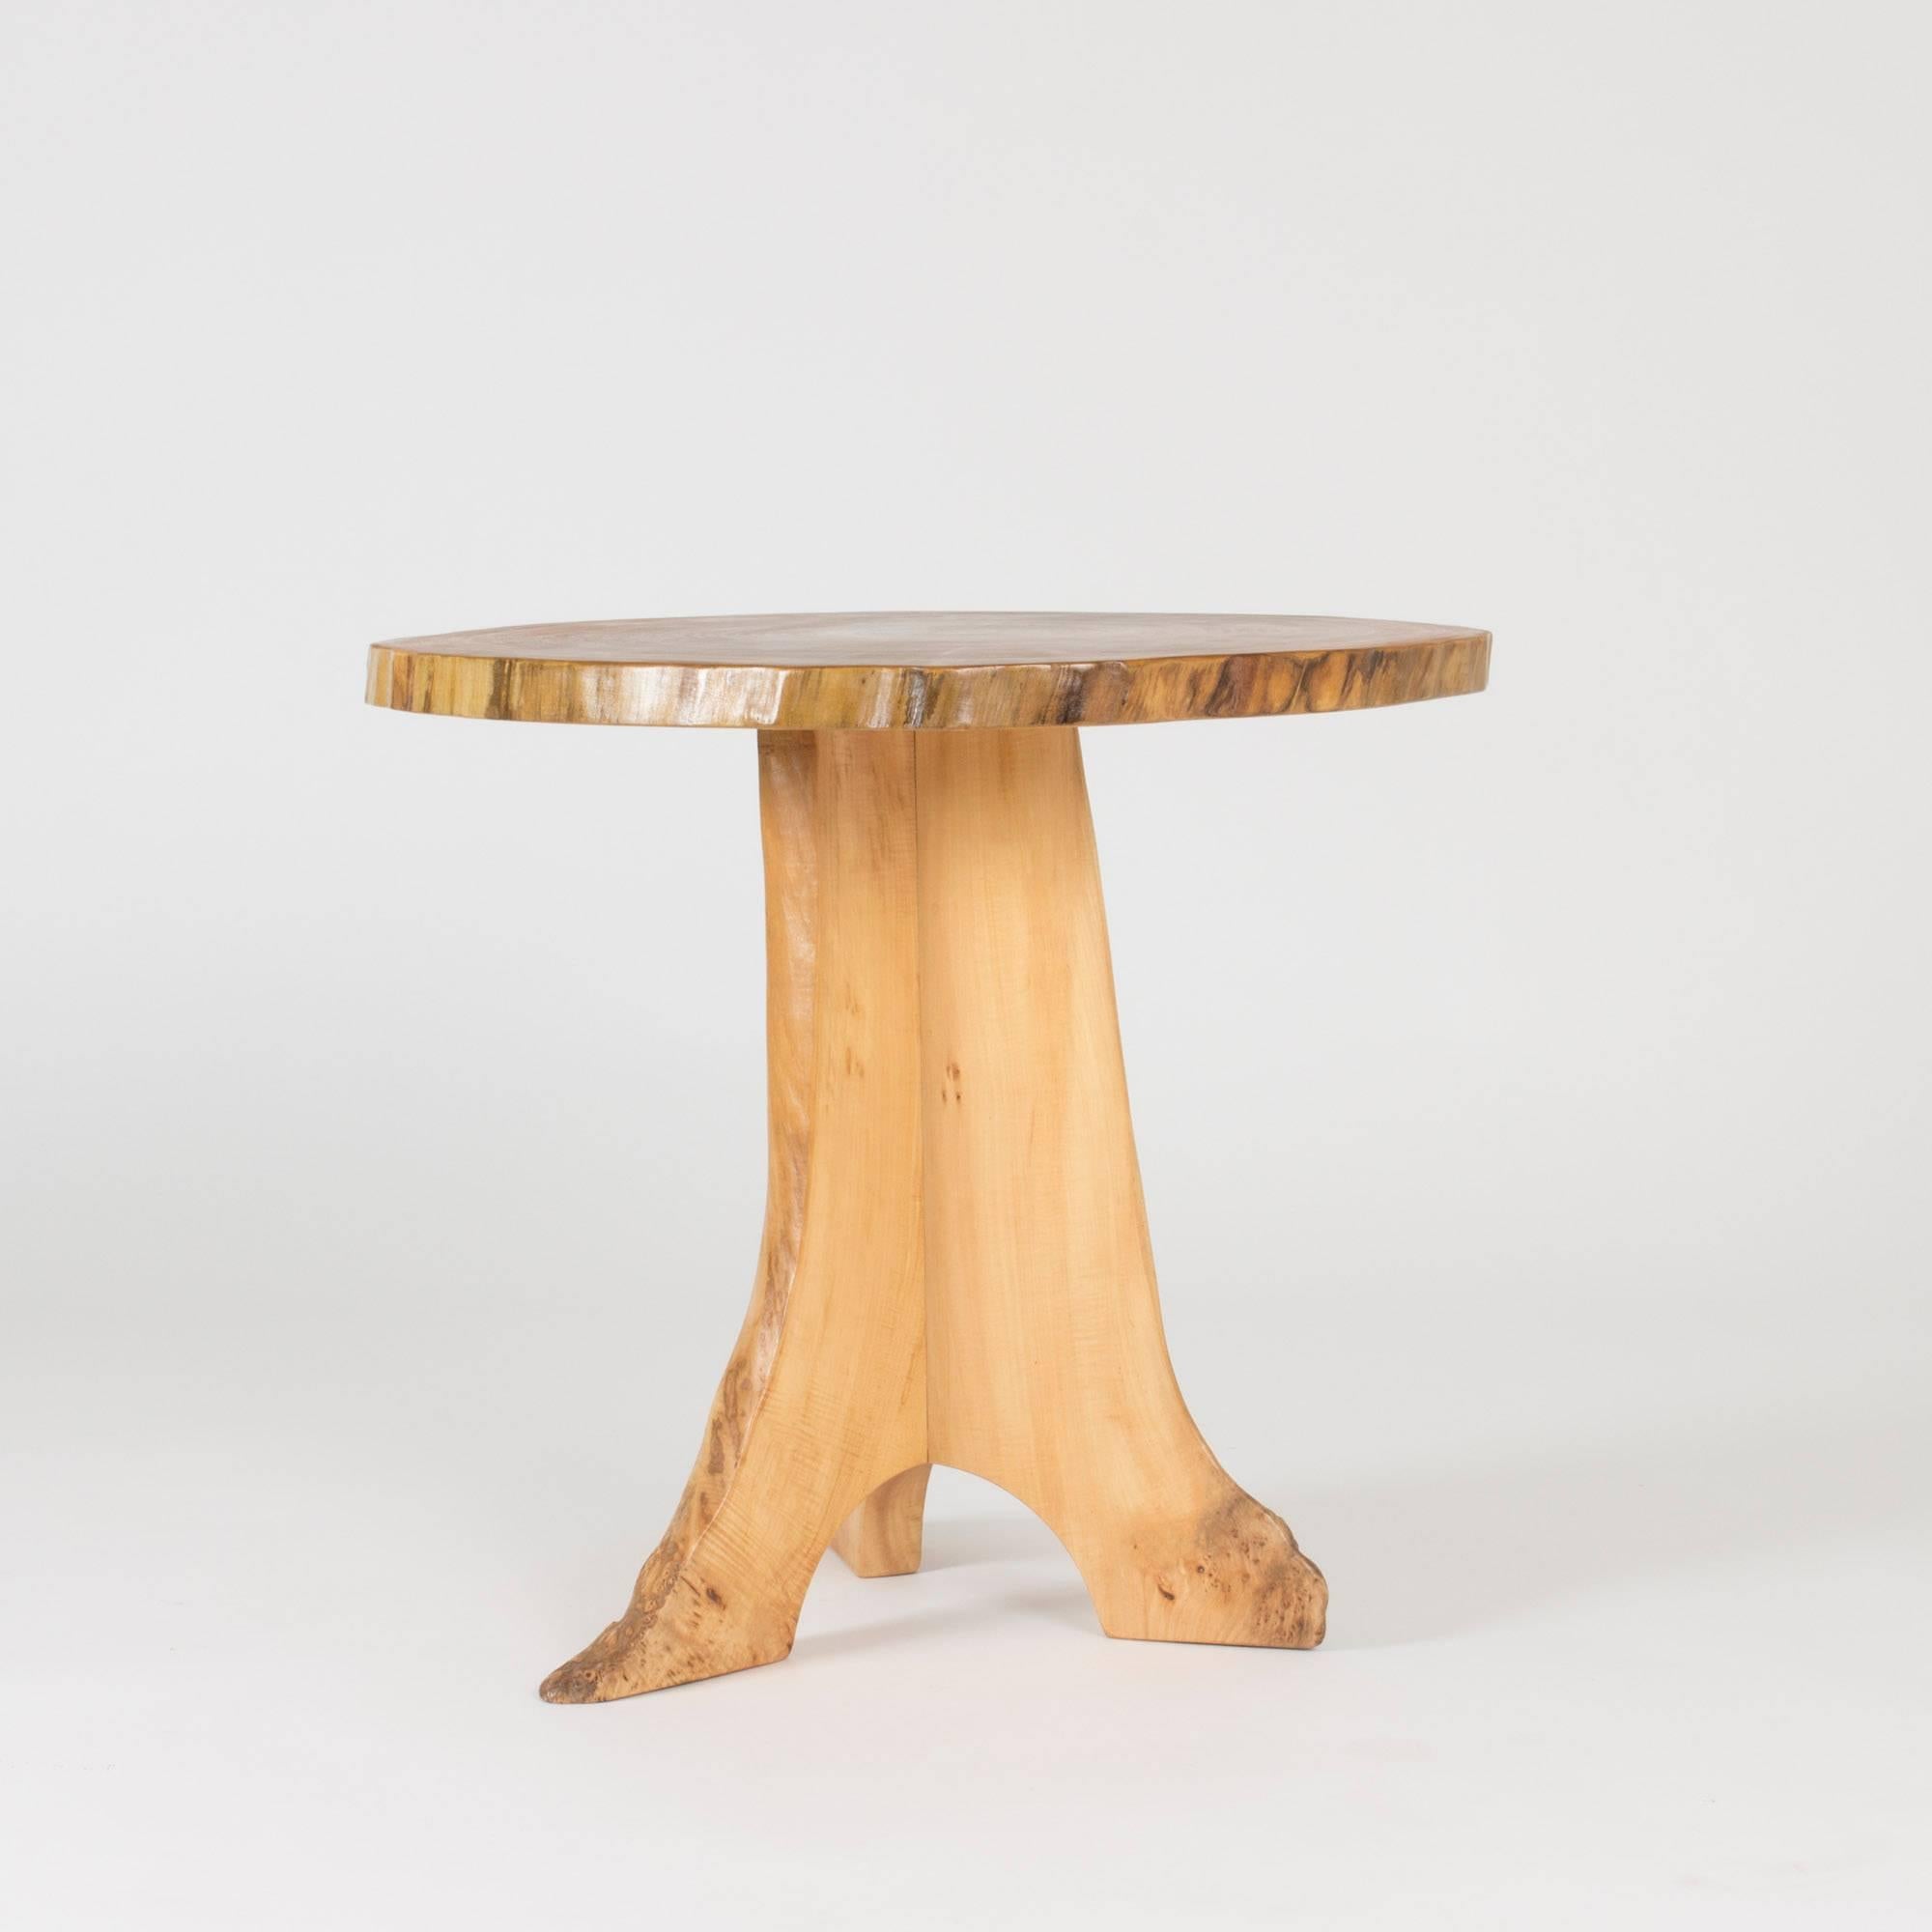 Organic occasional table by Sigvard Nilsson, made from poplar with a pedestal base. The table top is made of a sheet of a tree trunk that shows the annual rings. The base is made from pieces of wood where curves of the tree has been used to create